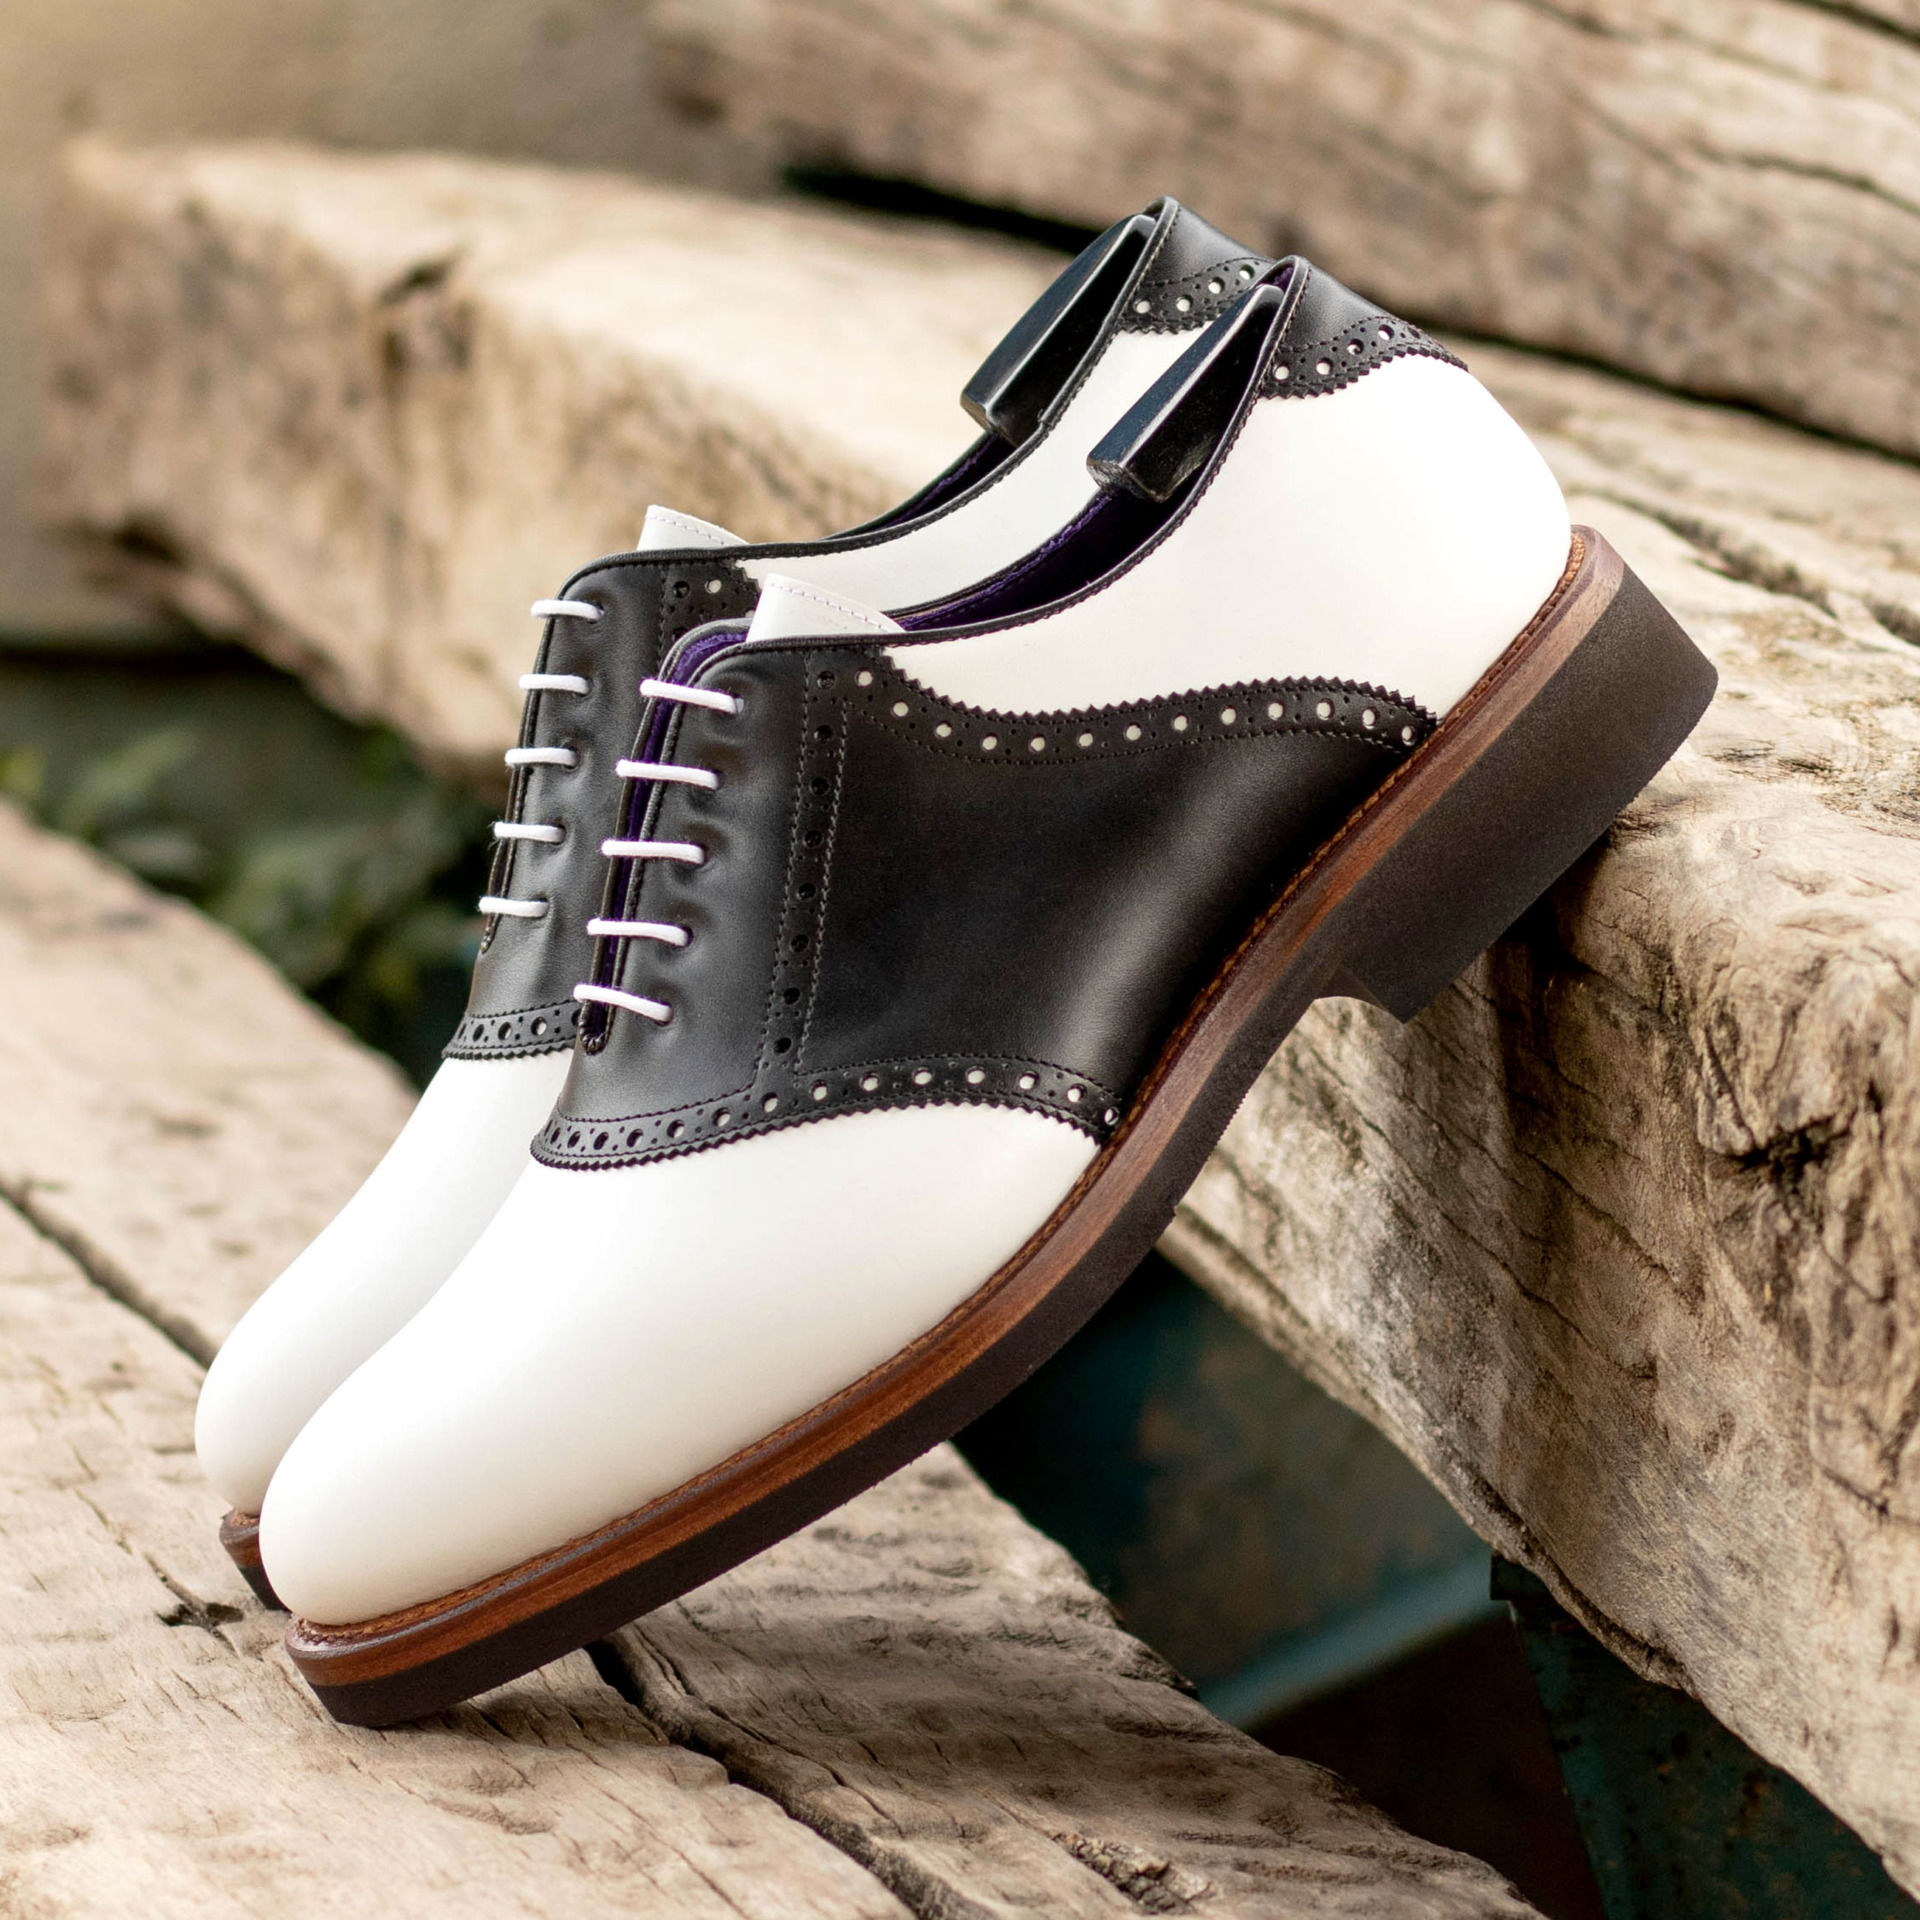 Introducing The Lincoln Ave. Saddle Shoe No. 8202: A Fusion of Craftsmanship and Style